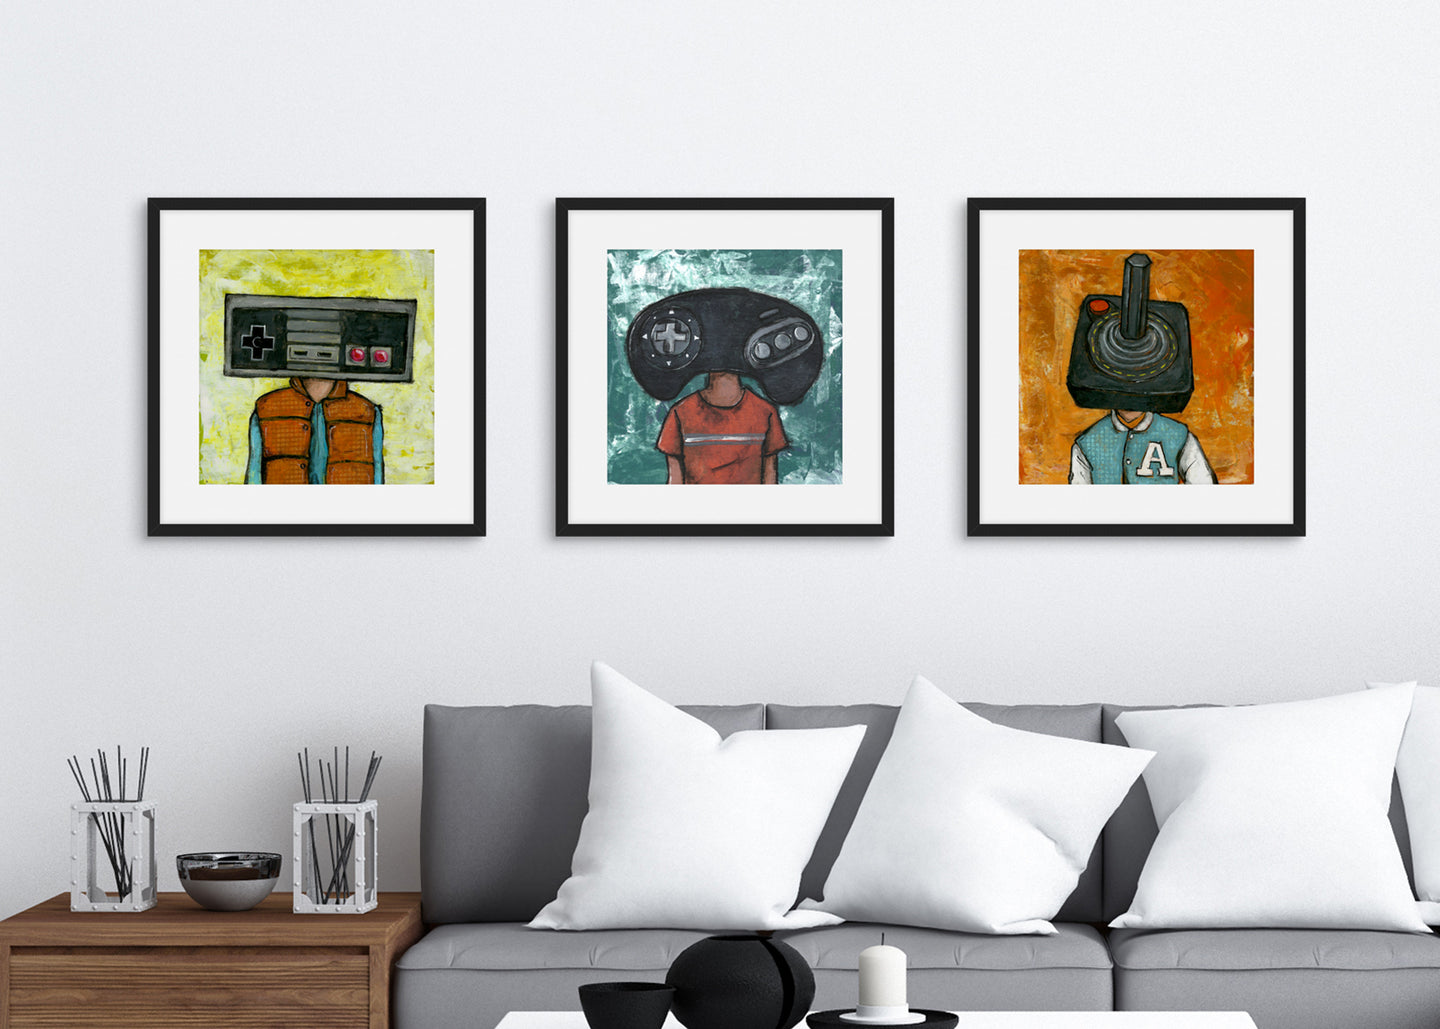 Three black frames on a wall above a grey sofa. The three frames have art prints of illustrated game controllers. The first frame features a vintage Nintendo controller, the second frame a Sega Genesis original controller, and the third frame is an Atari frame. 